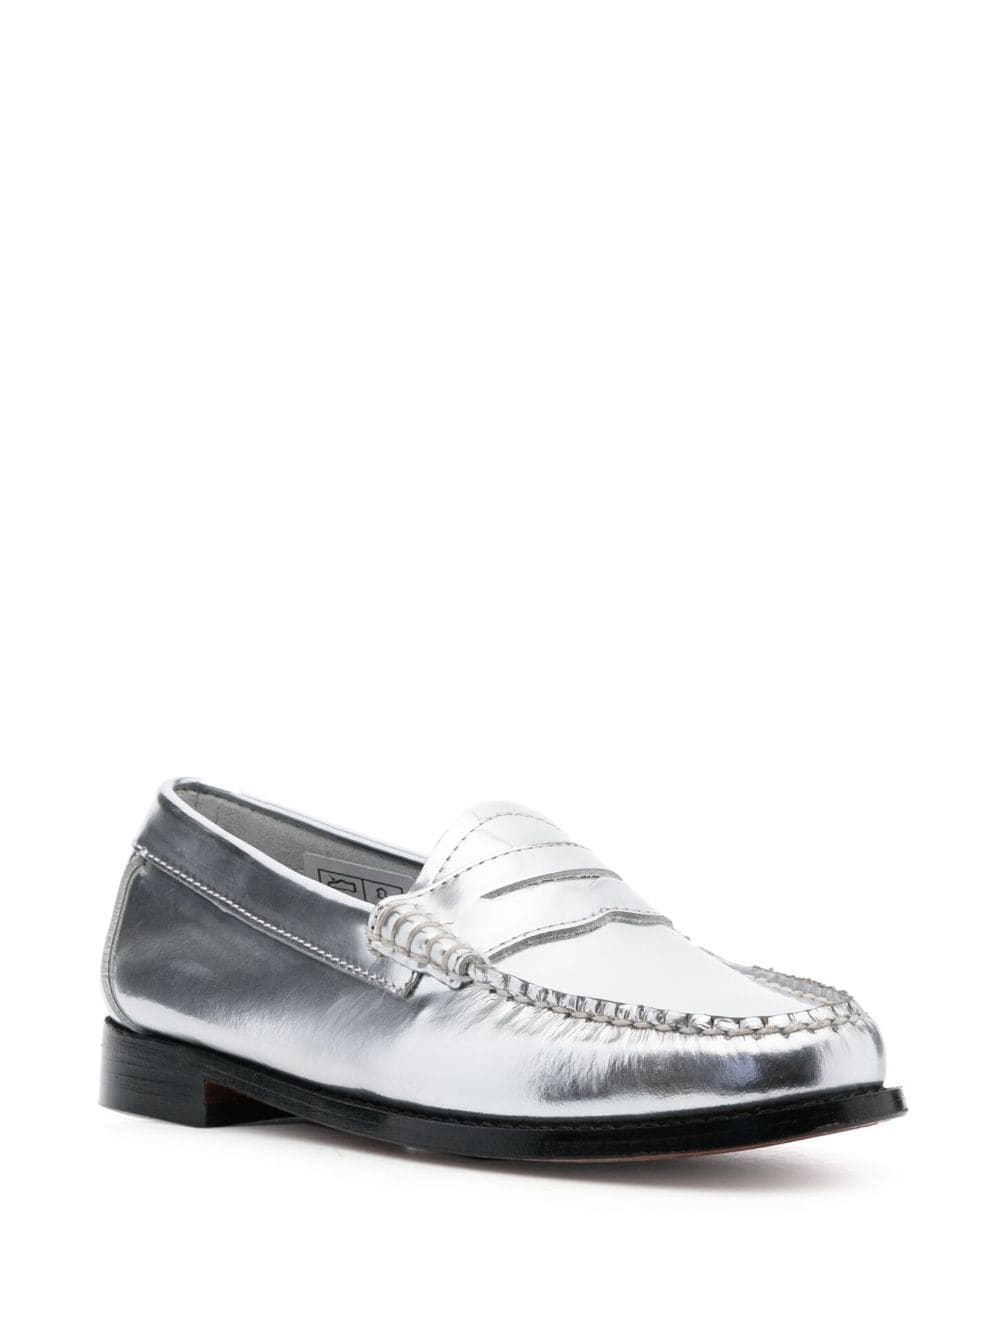 Image 2 of G.H. Bass & Co. Weejuns penny-slot loafers